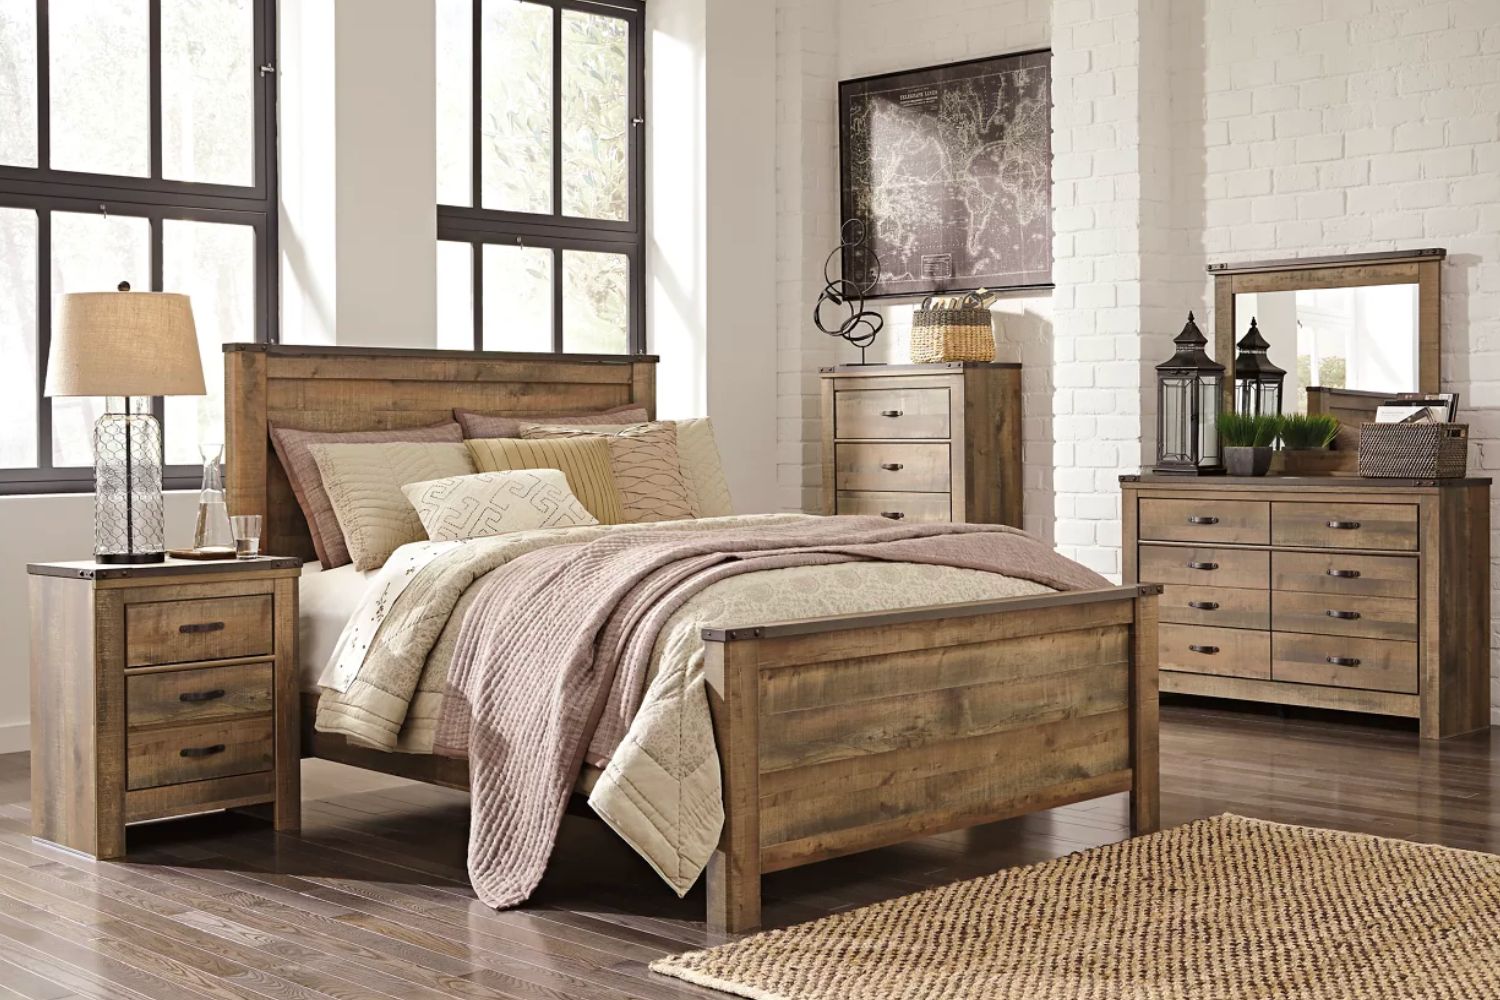 Deals Roundup Cyber Monday Furniture 11/29: Trinell Nightstand